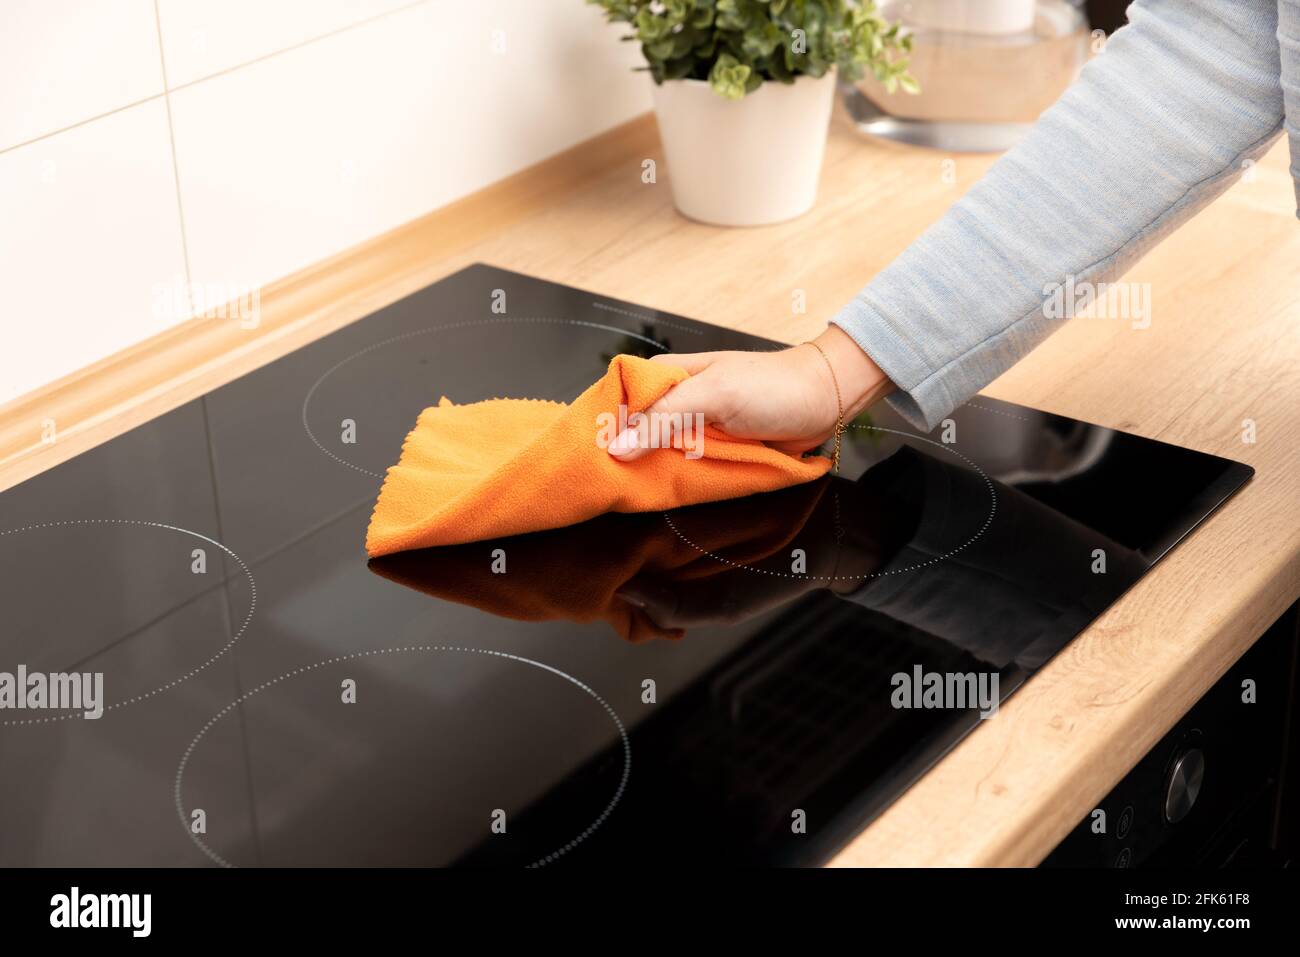 Woman cleaning induction stove. Modern kitchen with induction hob Stock Photo